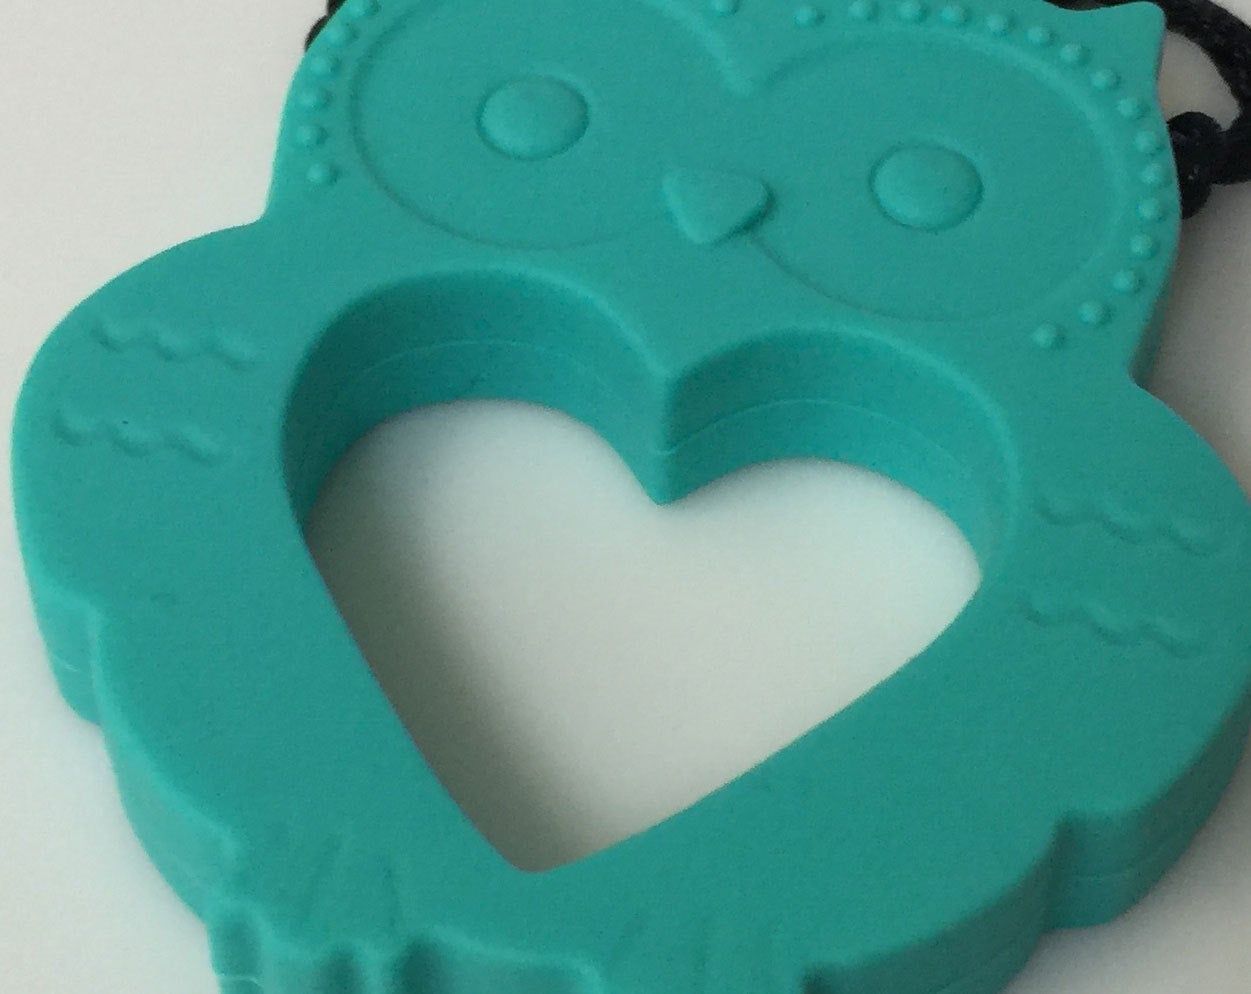 1 Silicone Owl Teether / Pendant in Teal - Silicone Teething, Silicone Teether, Teething Pendant